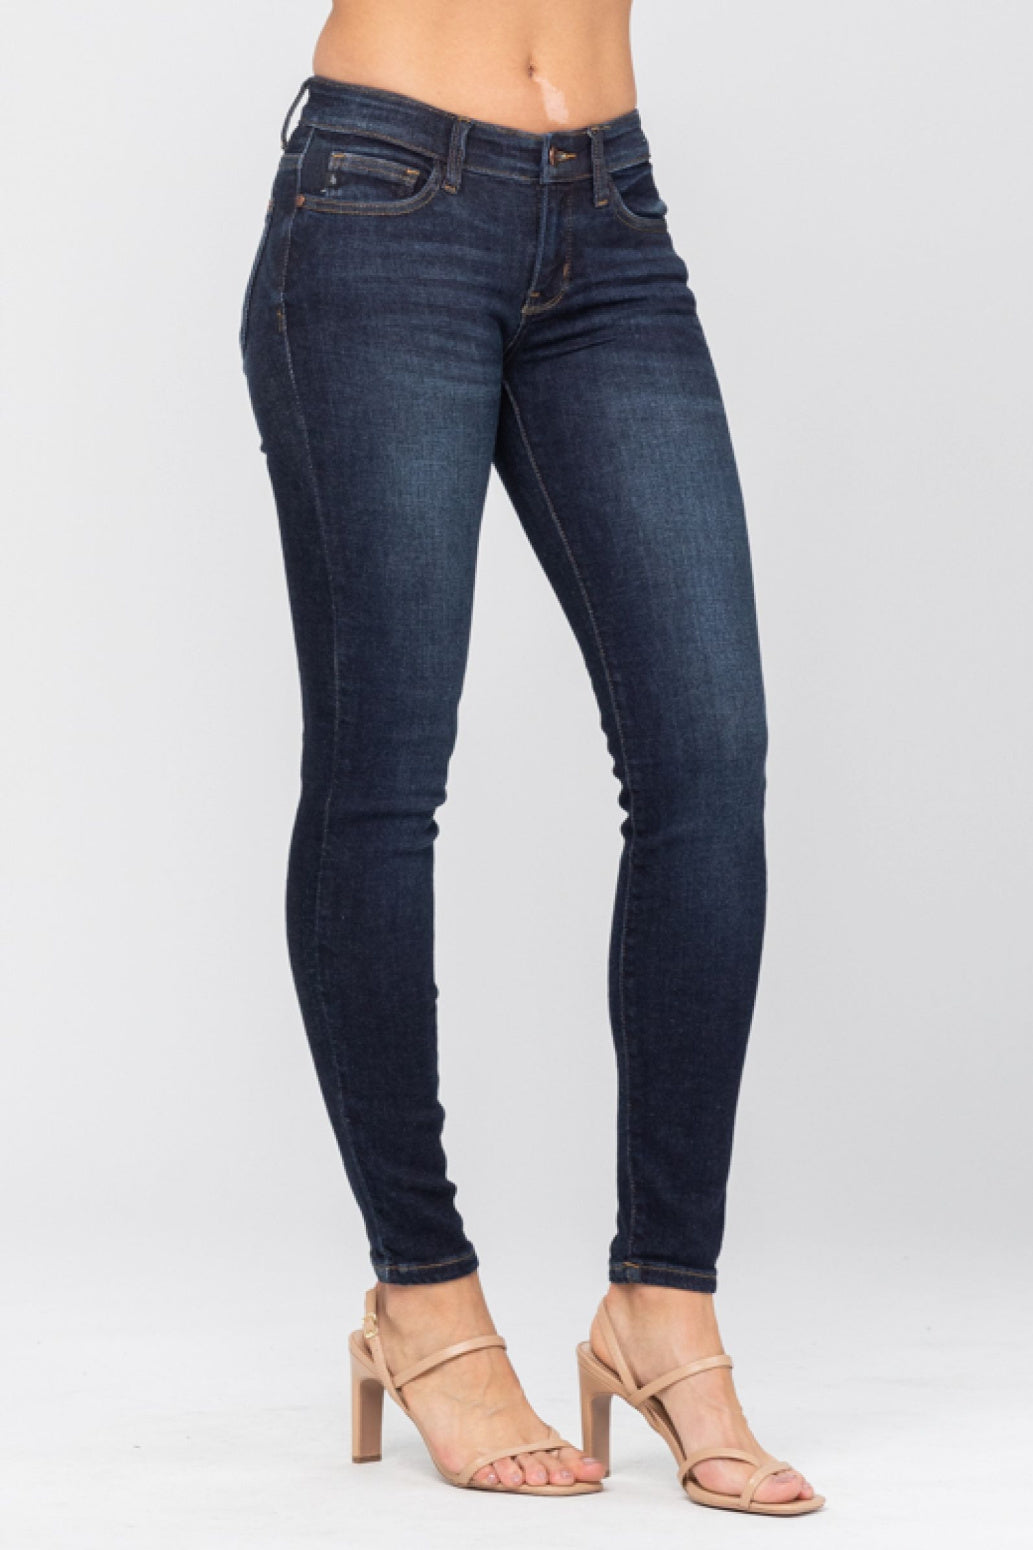 Judy Blue Handsand Resin Mid-Rise Skinny Jeans Style 82110